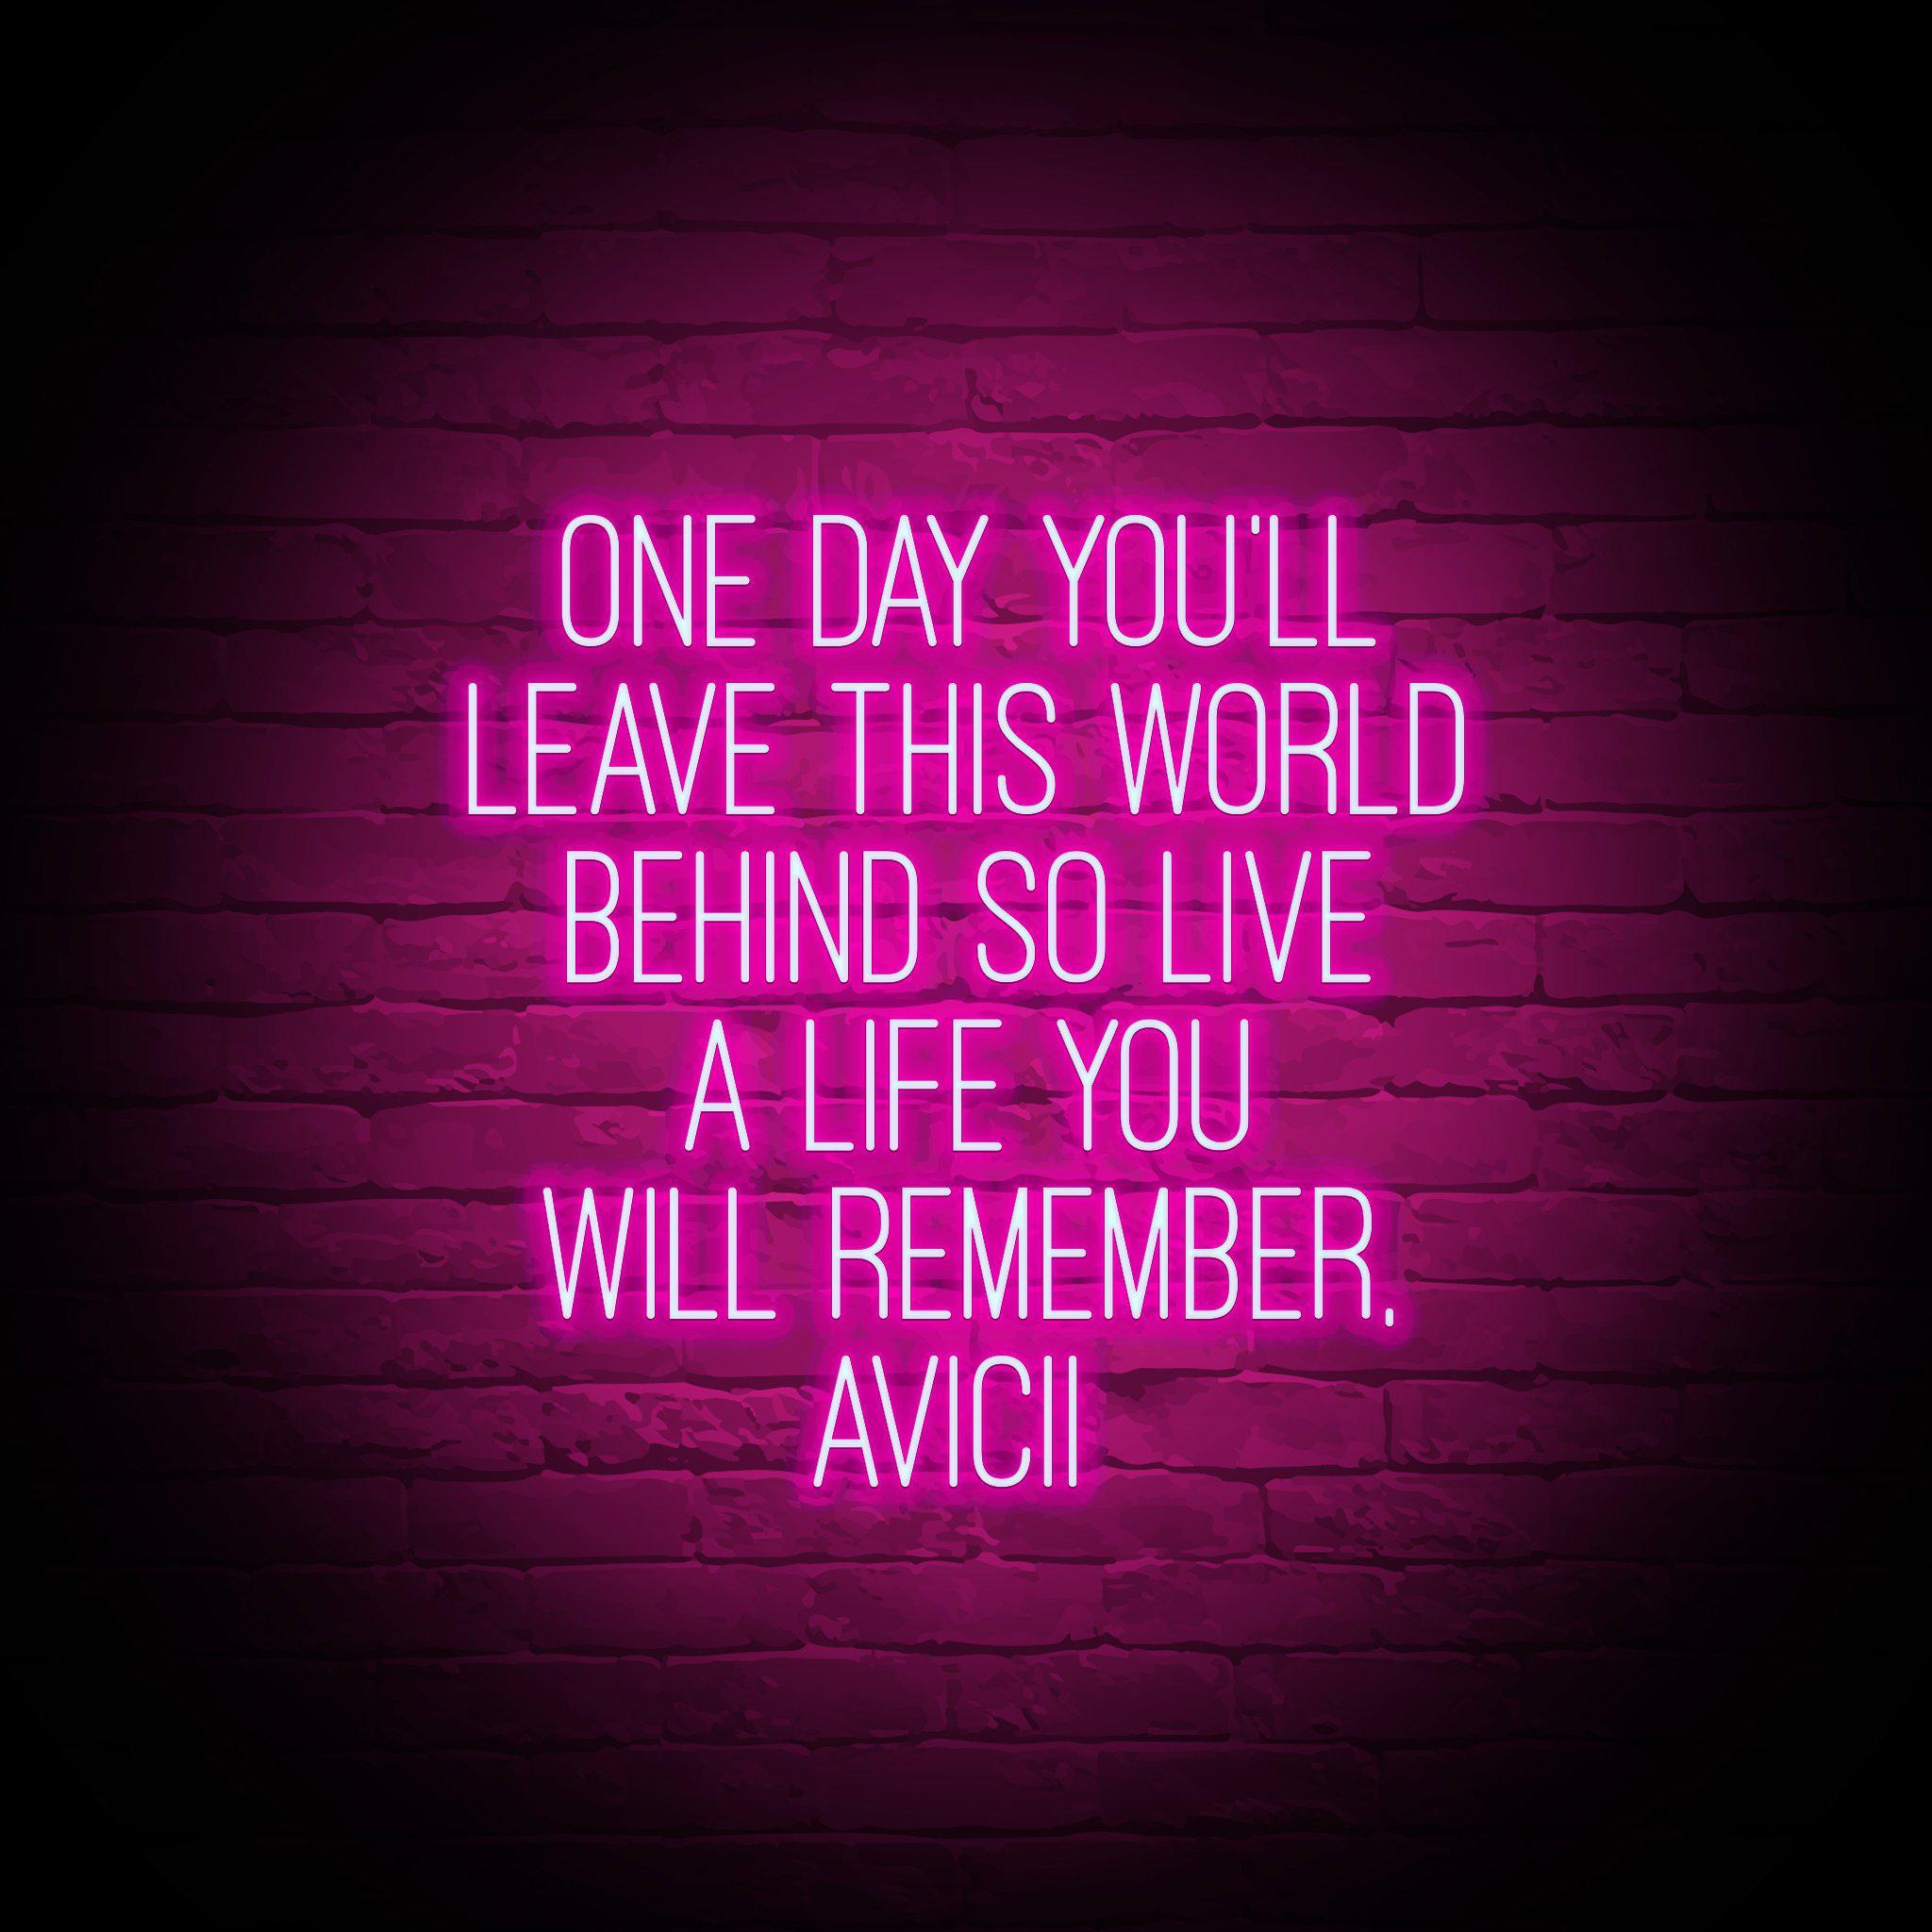 Will behind leave world day you this one 'ONE DAY